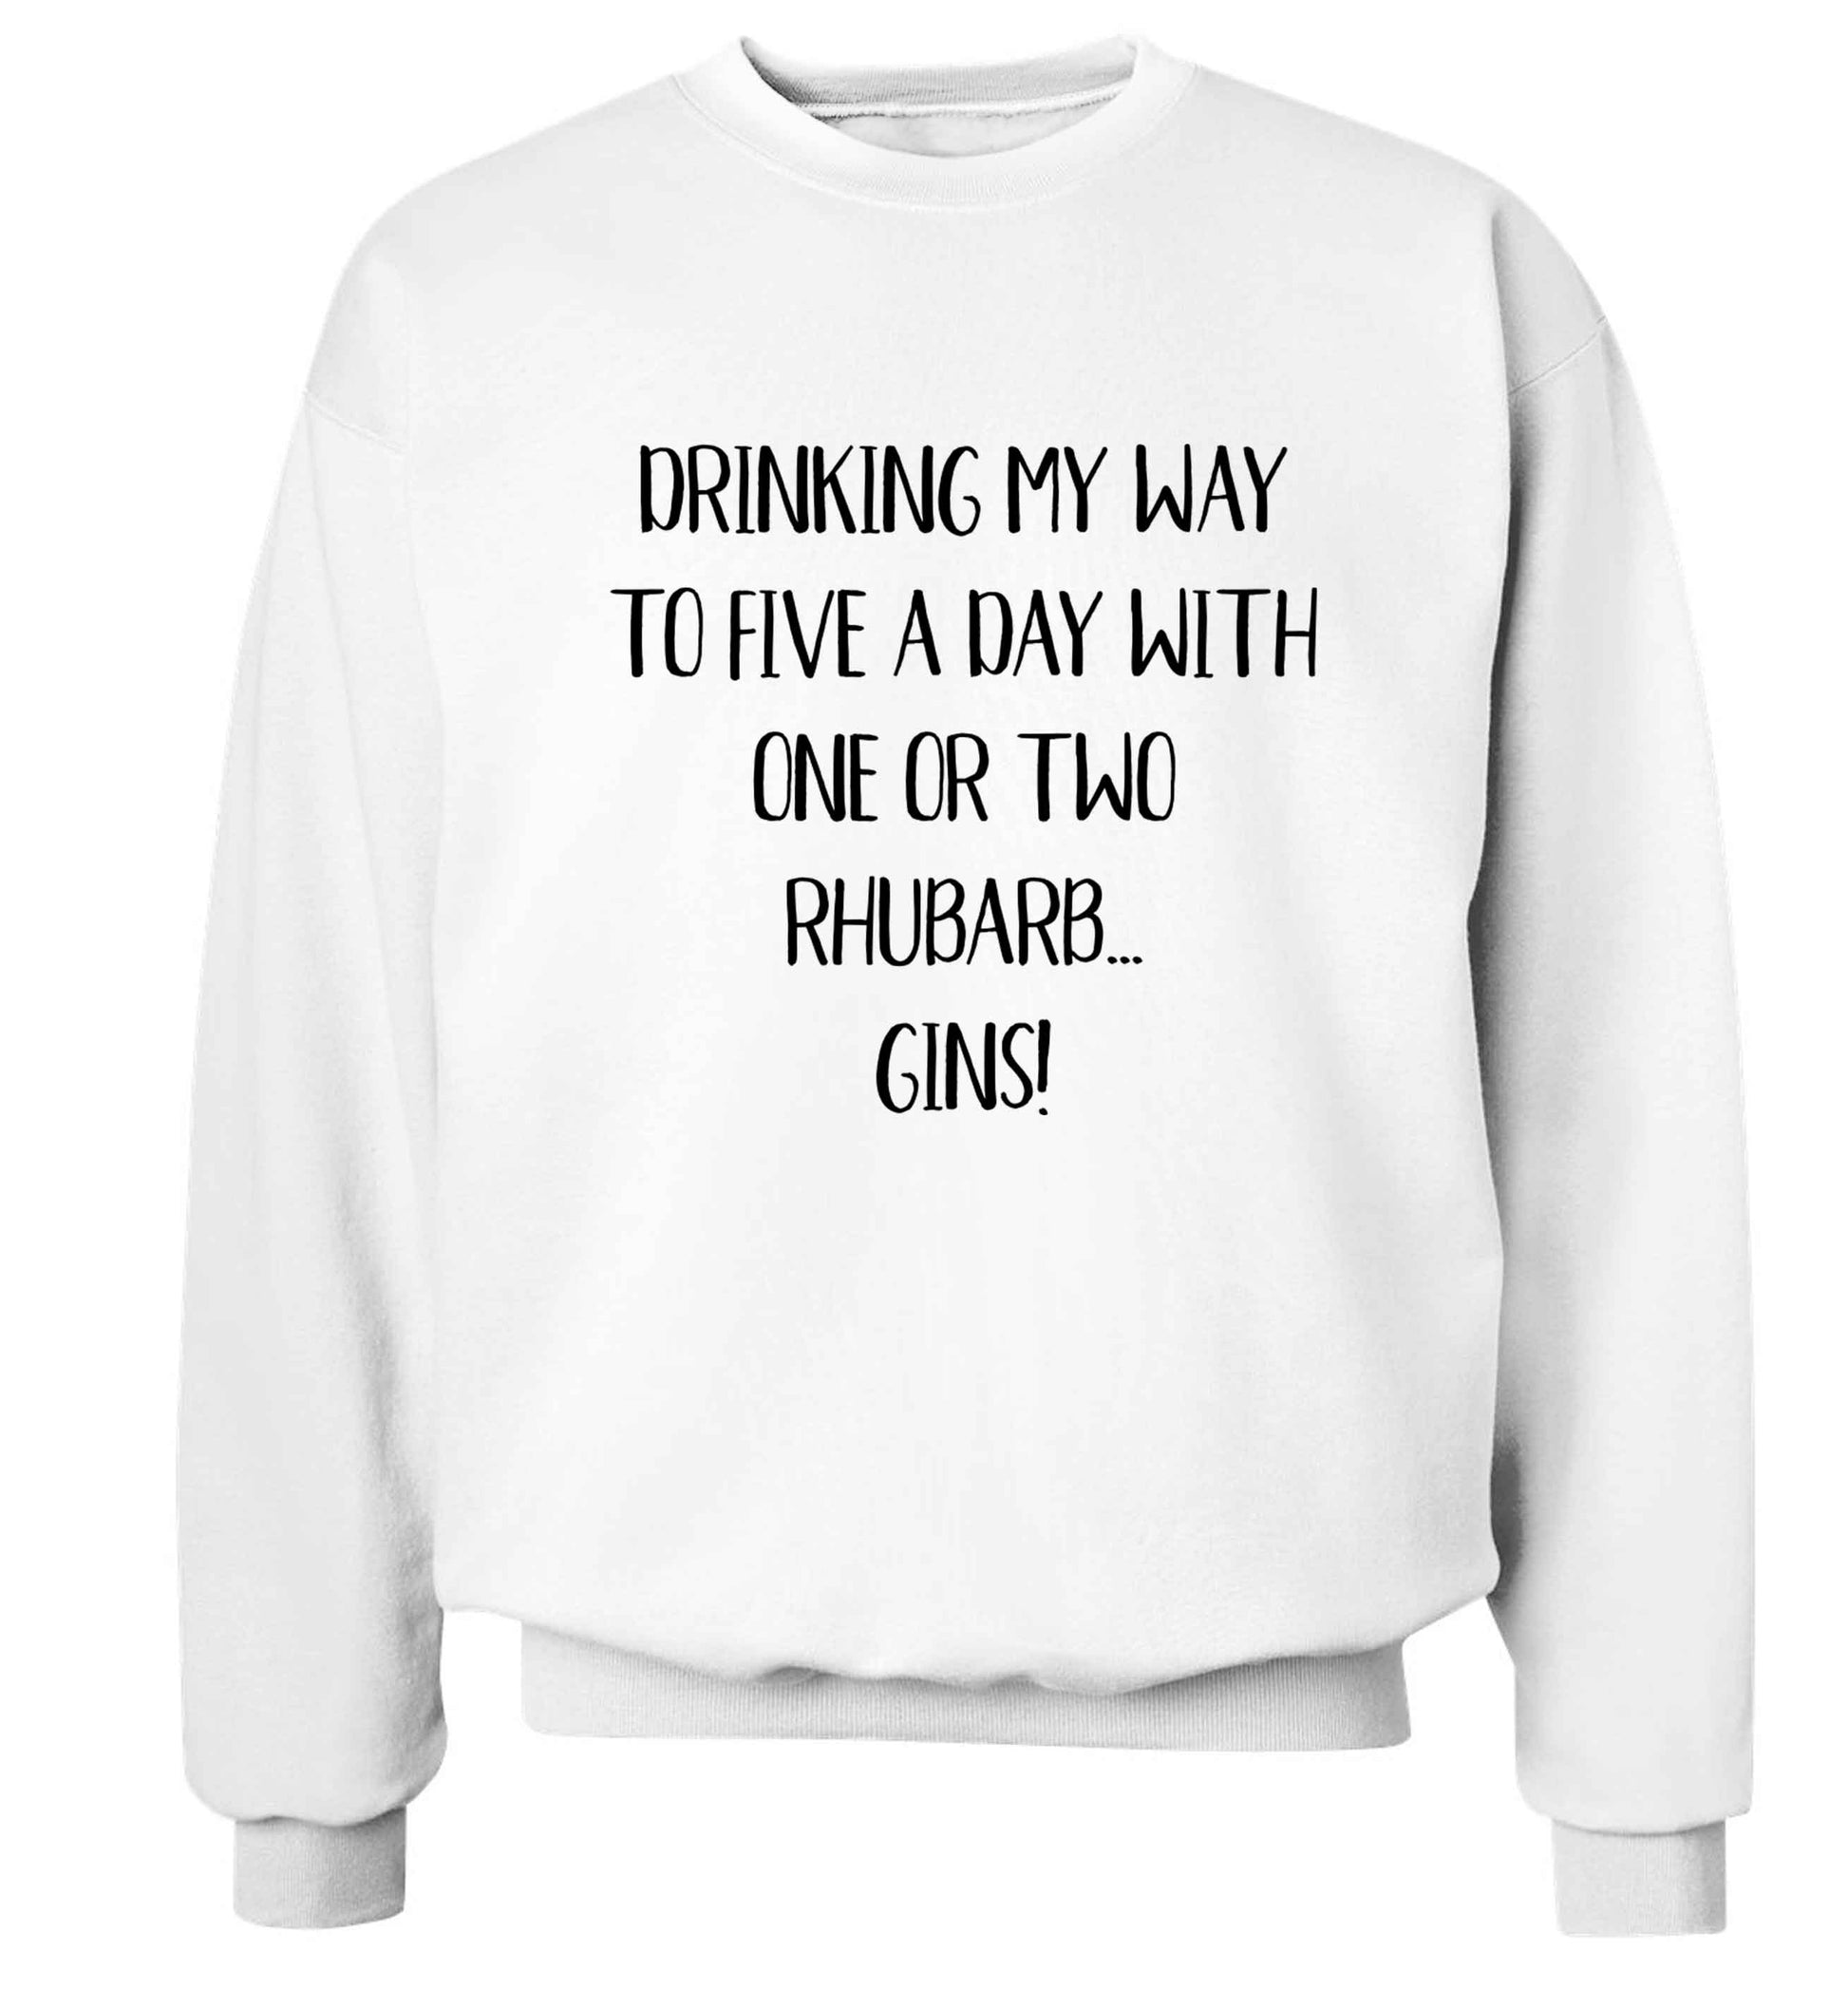 Drinking my way to five a day with one or two rhubarb gins Adult's unisex white Sweater 2XL